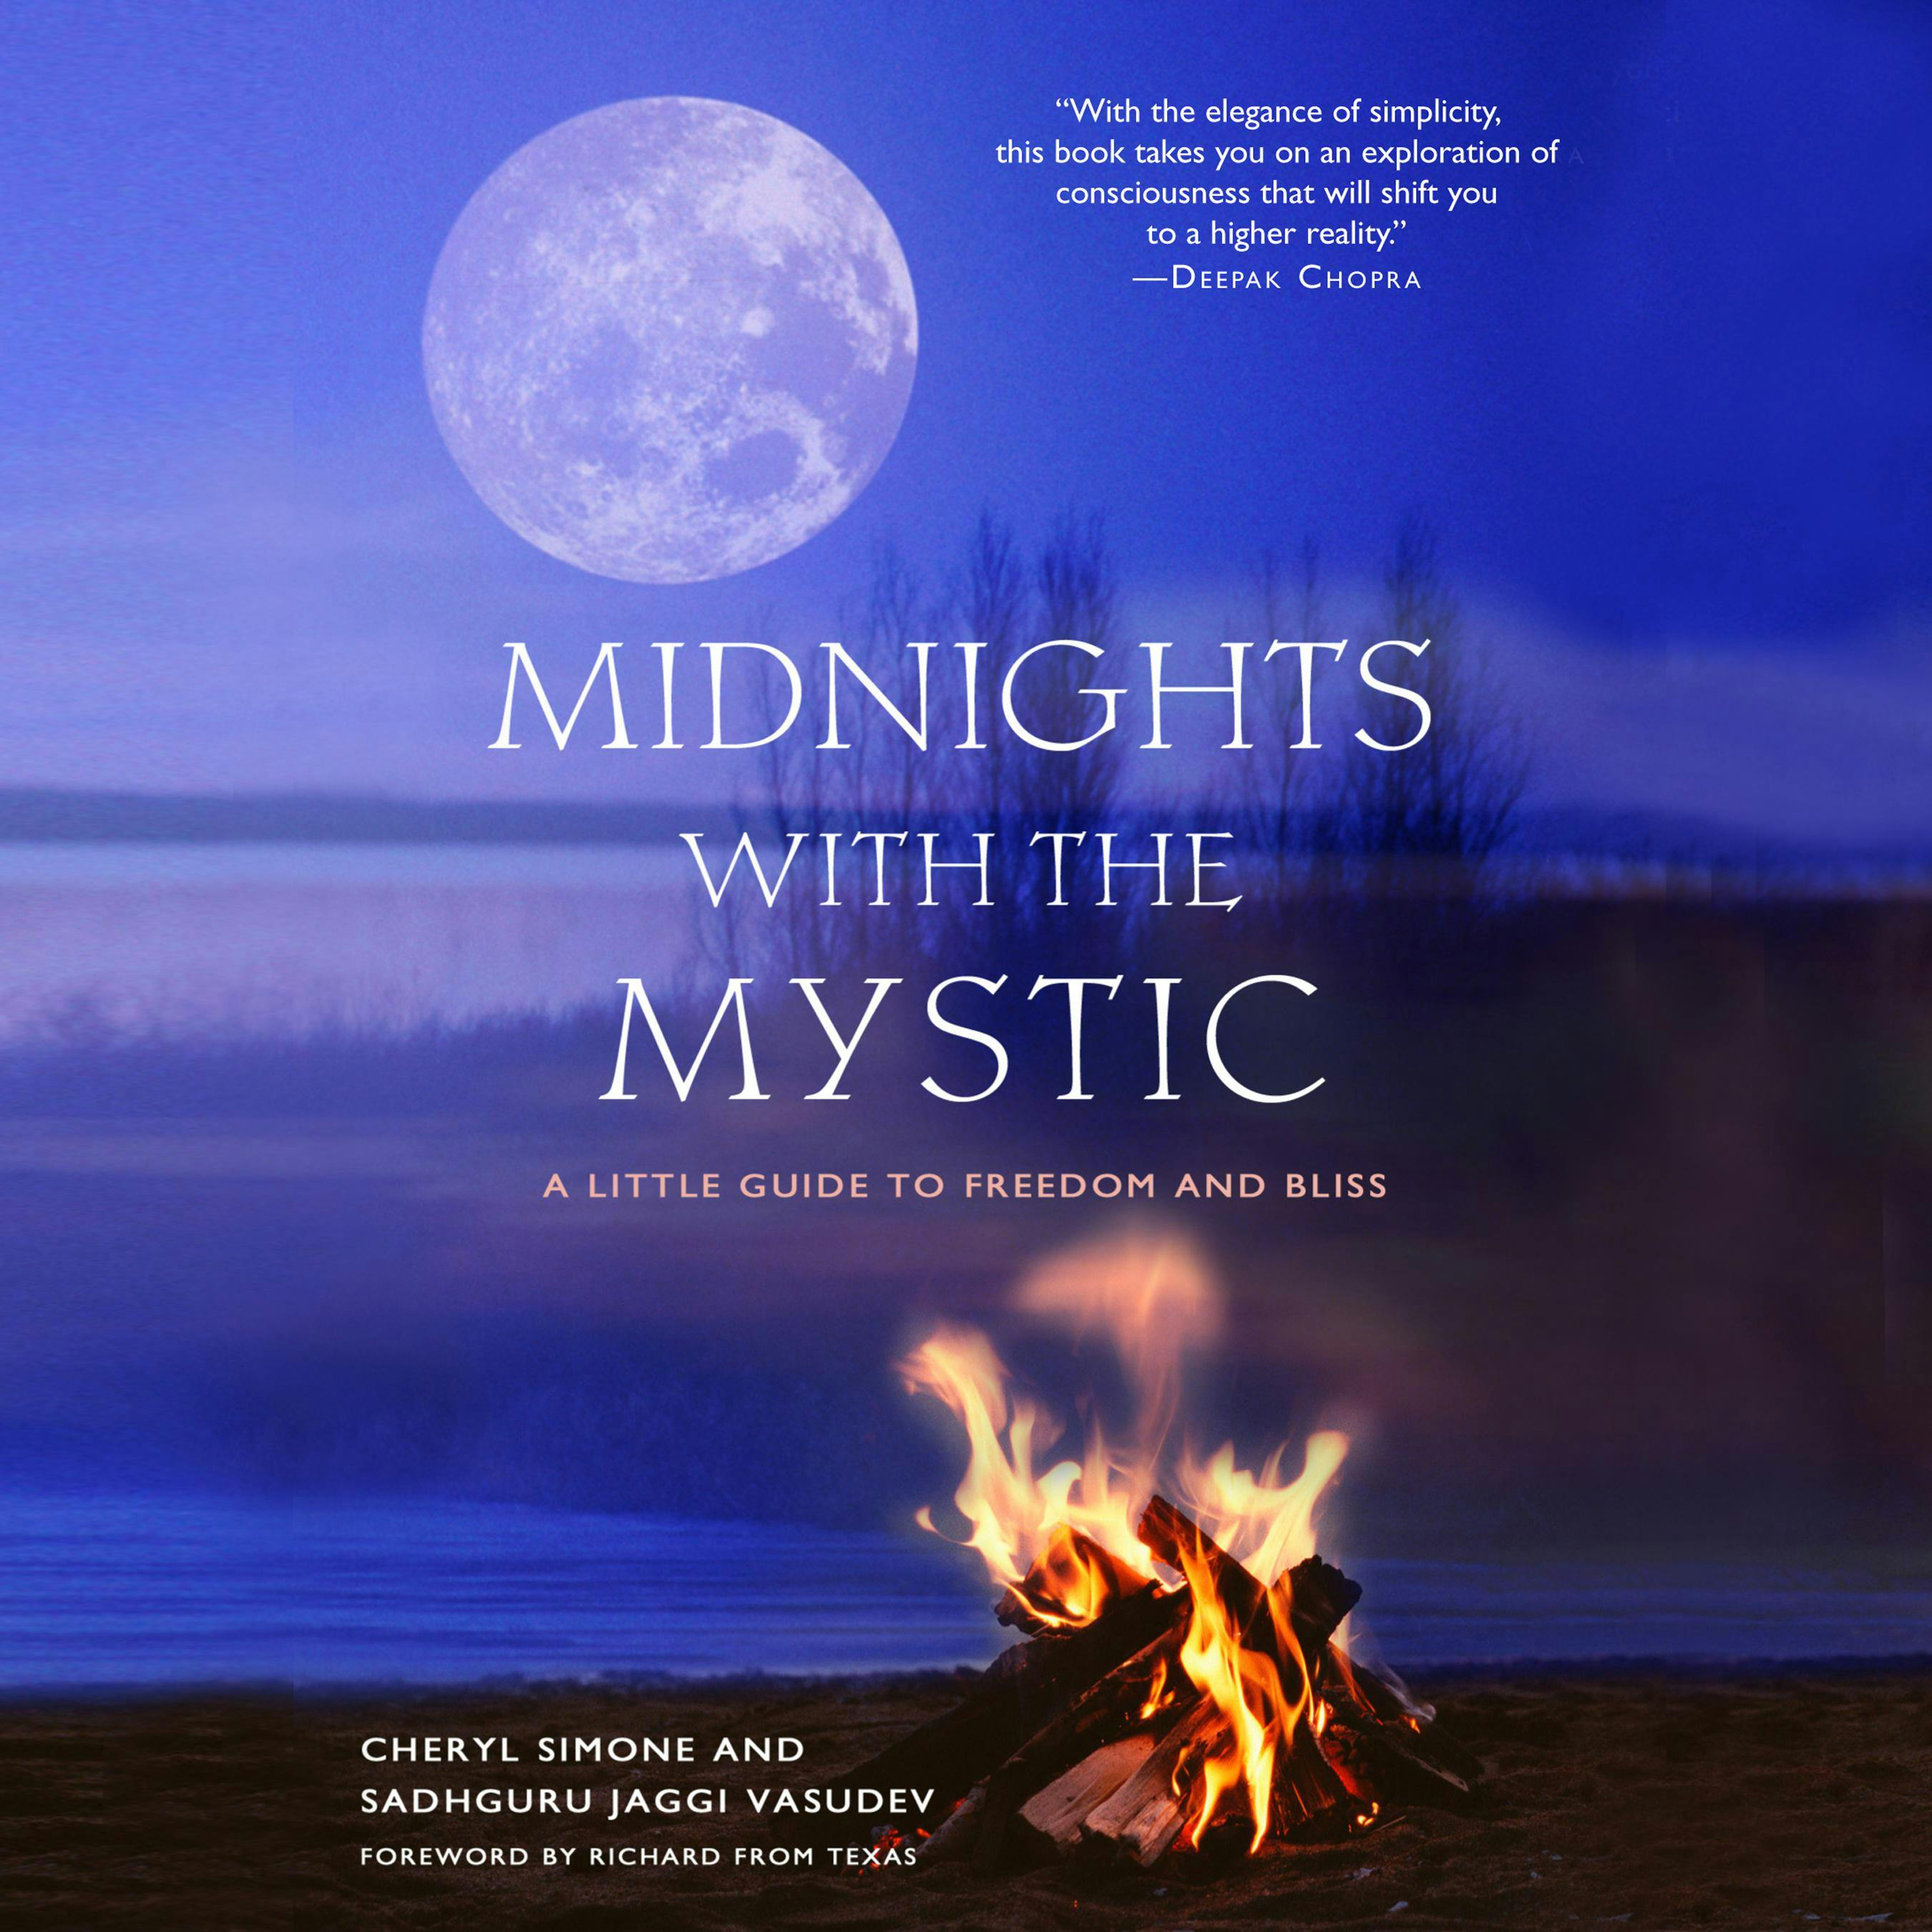 Midnights with the Mystic: A Little Guide to Freedom and Bliss - undefined